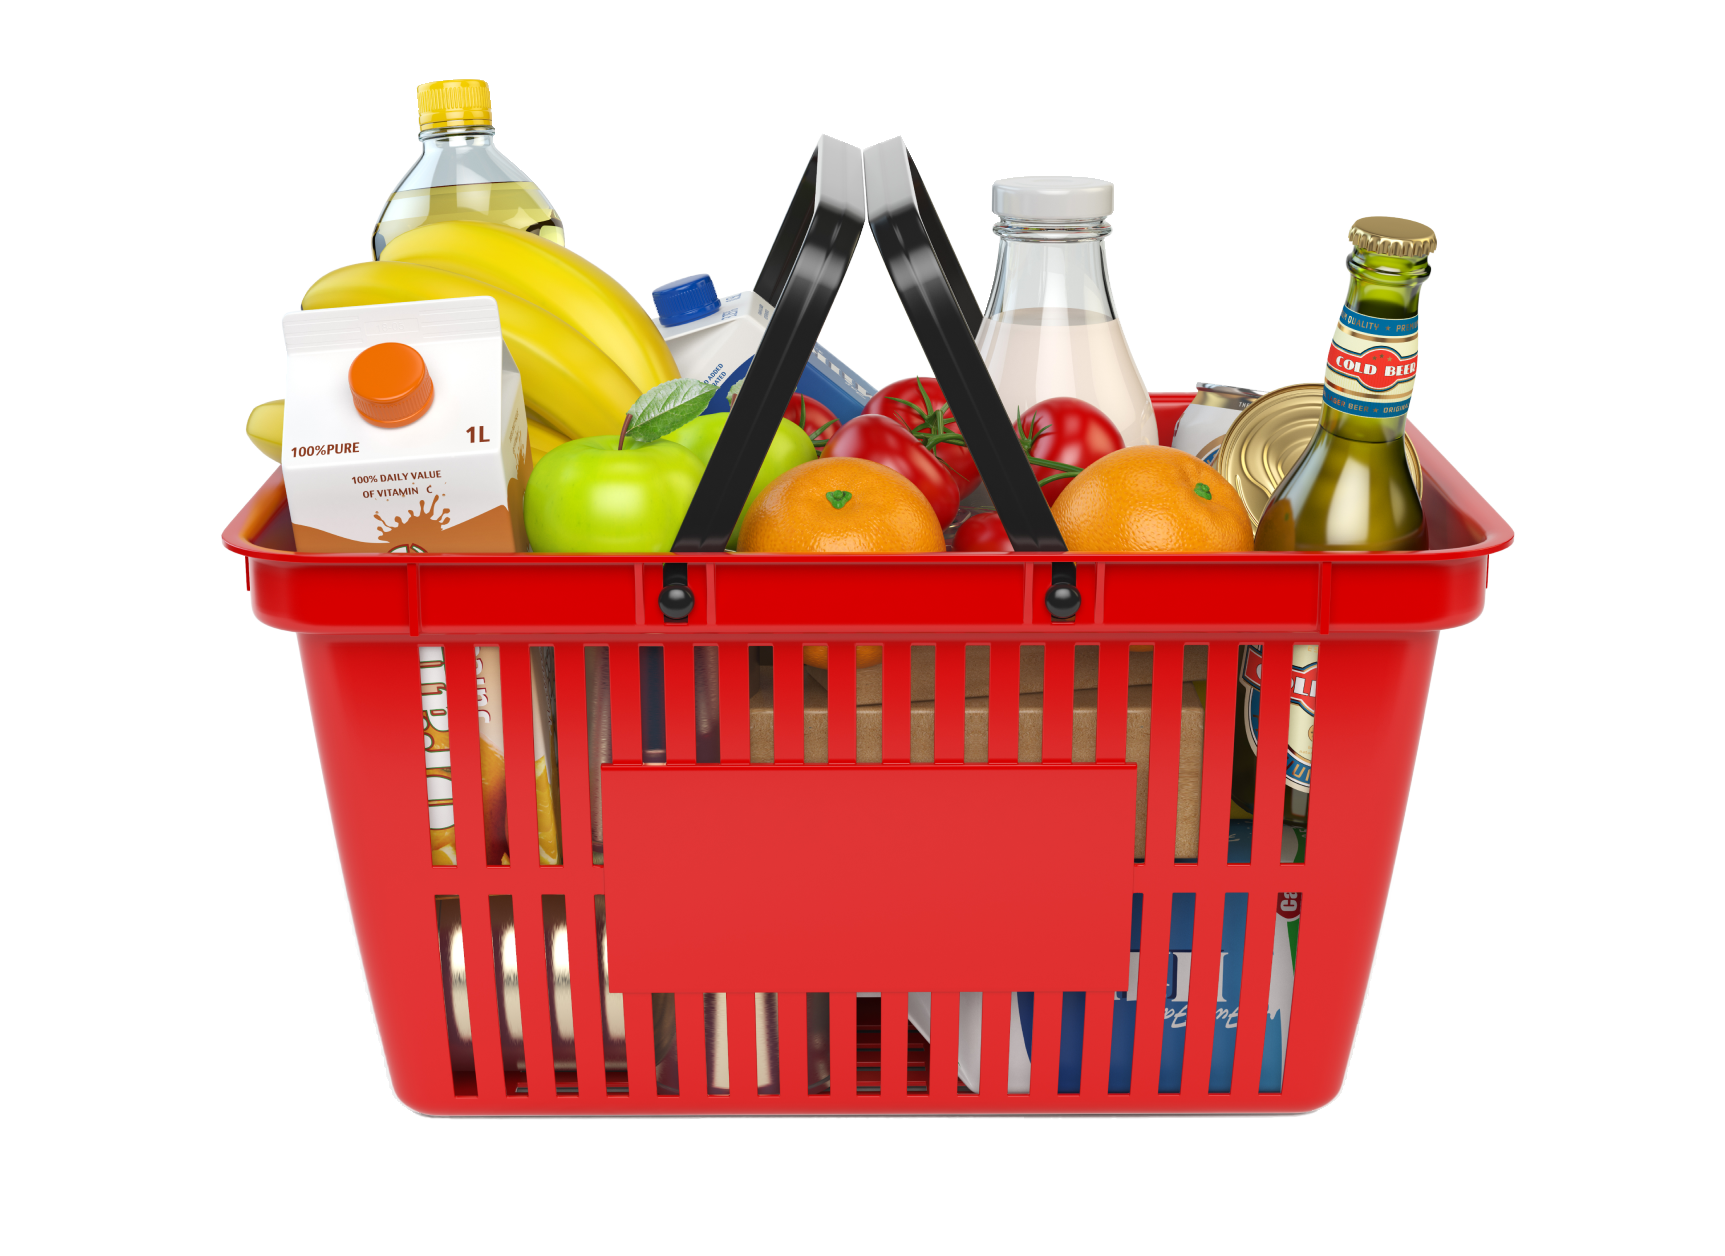 Basket filled with grocery items